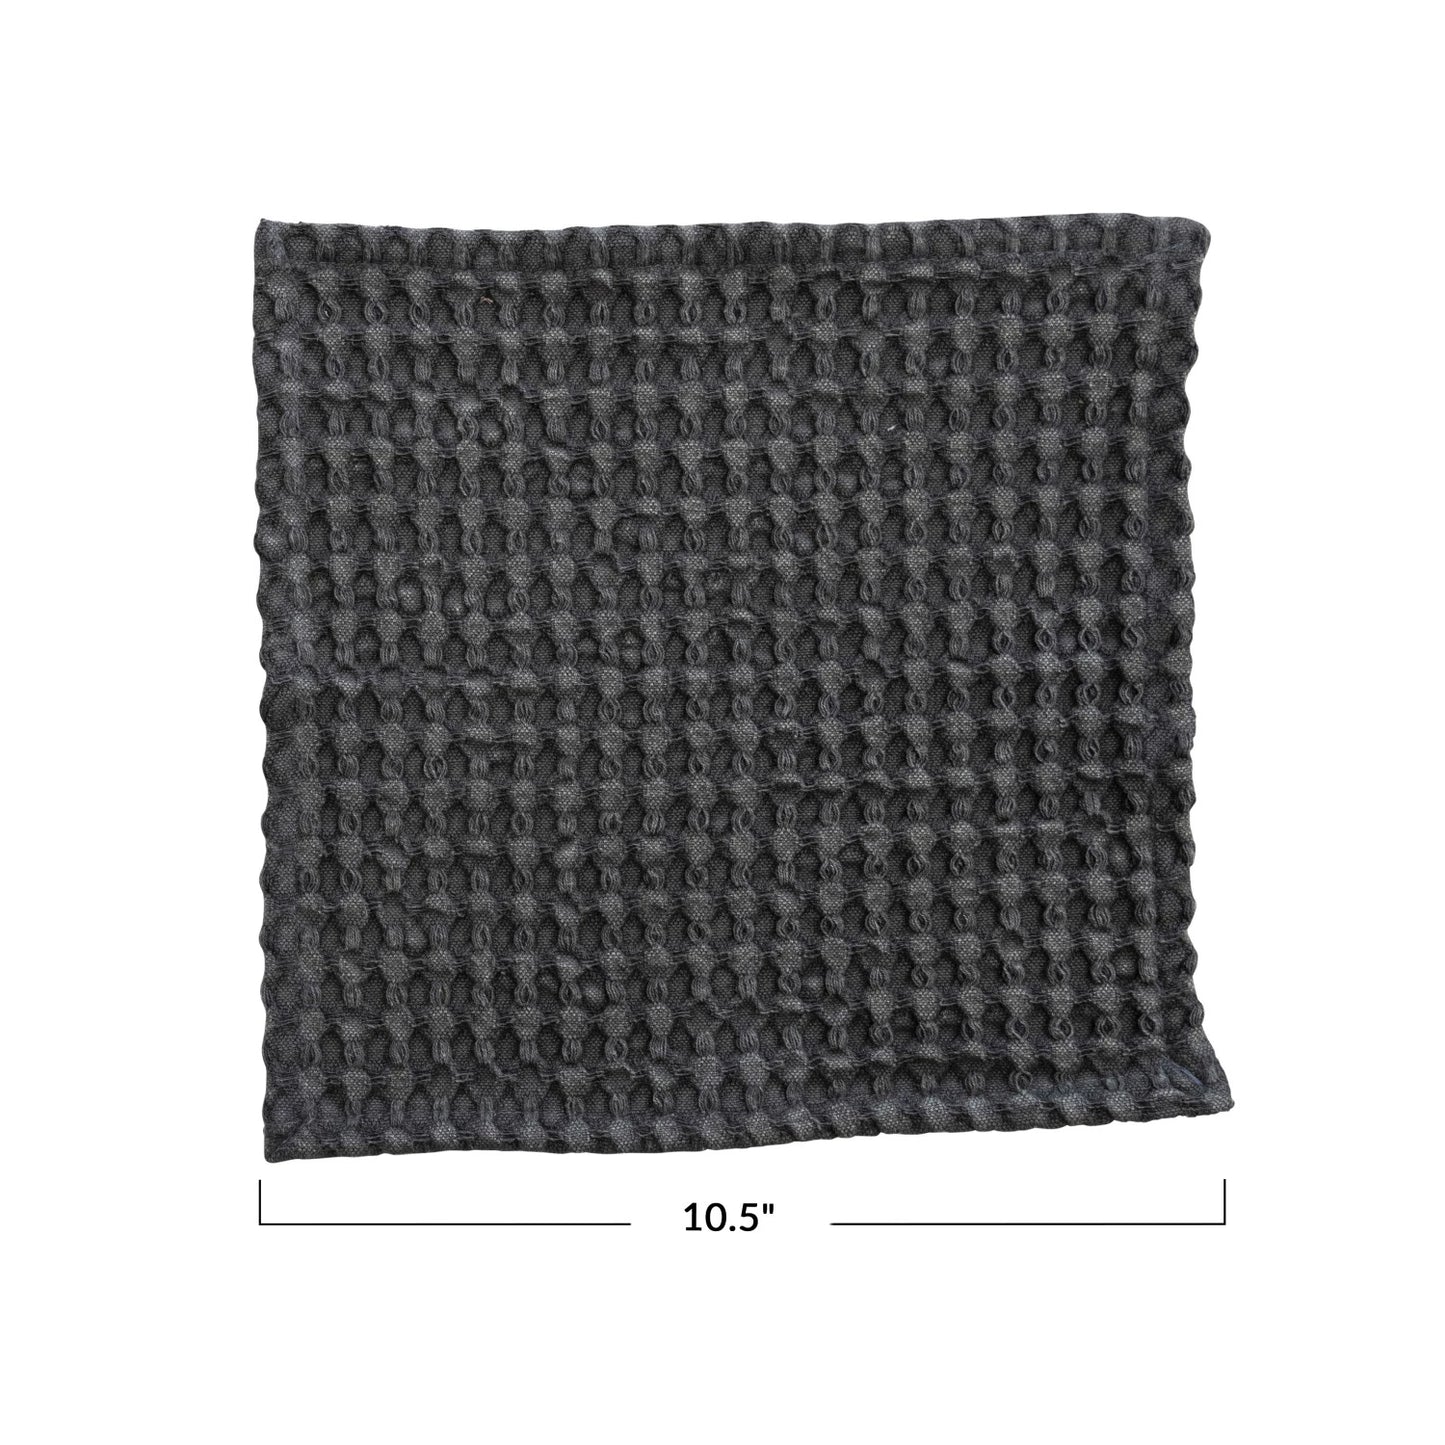 Bloomingville - Cotton Waffle Weave Dish Cloths - Charcoal - Set of 3